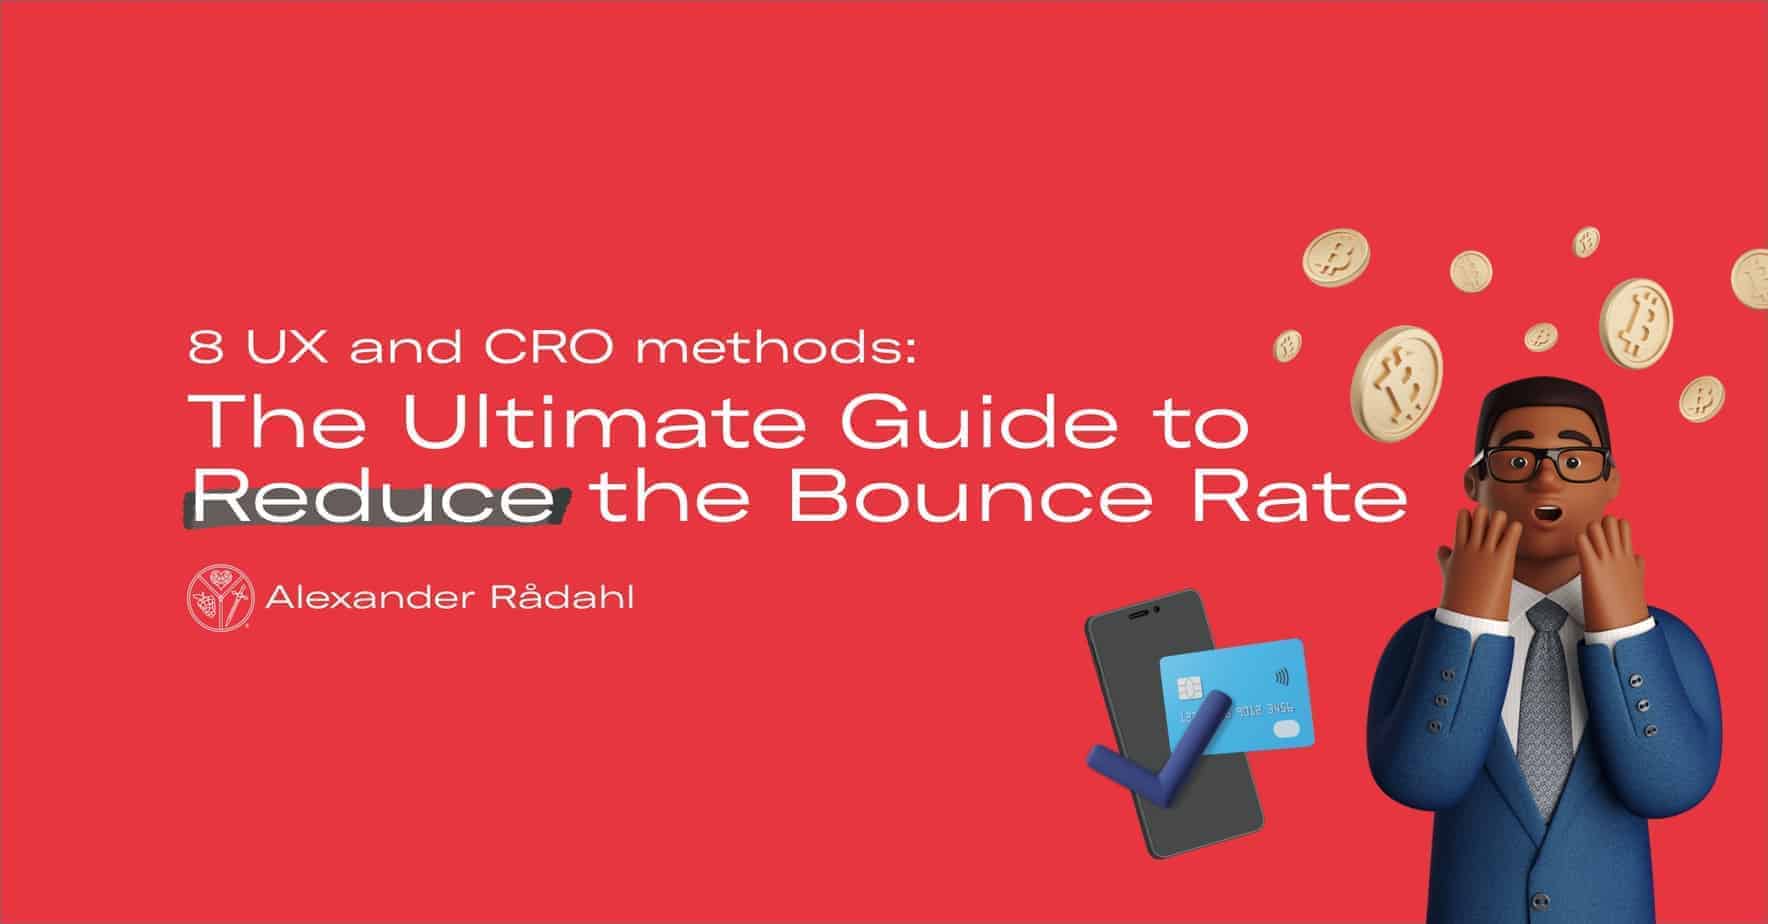 The Ultimate Guide: 8 Ways to Reduce the Bounce Rate and Increase Conversions on Your Website